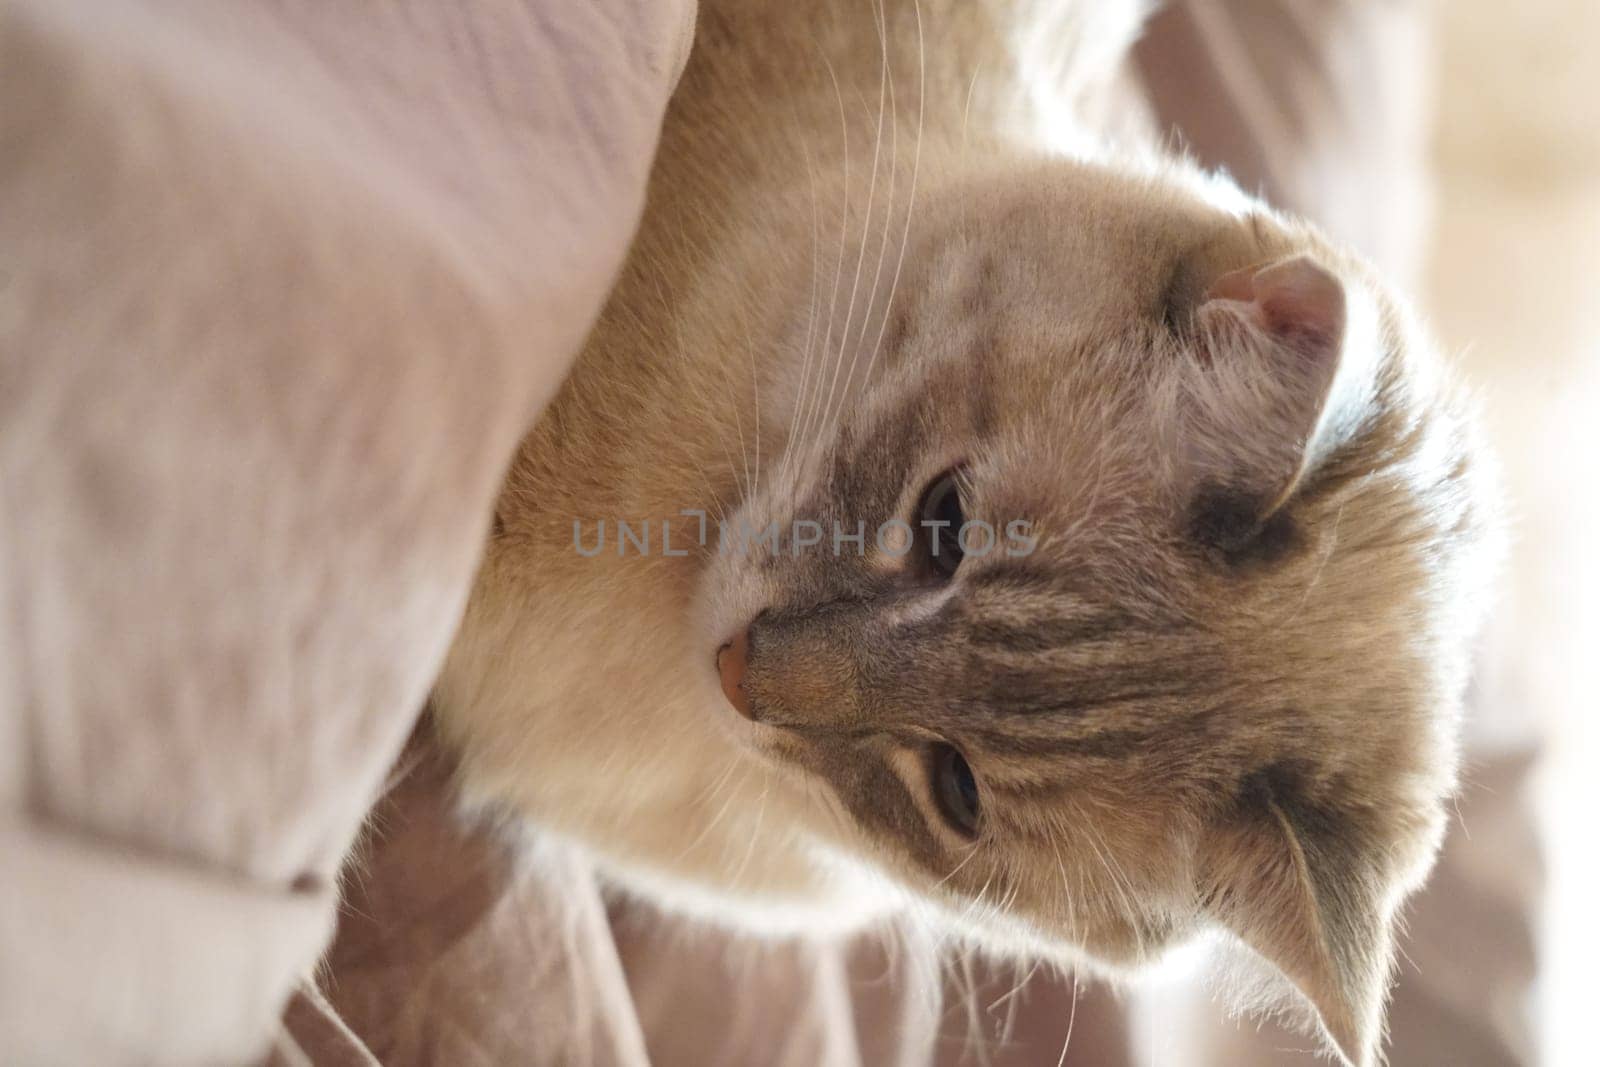 Front view of a cute beautiful Siamese breed cat on a classic brown blanket. High quality photo